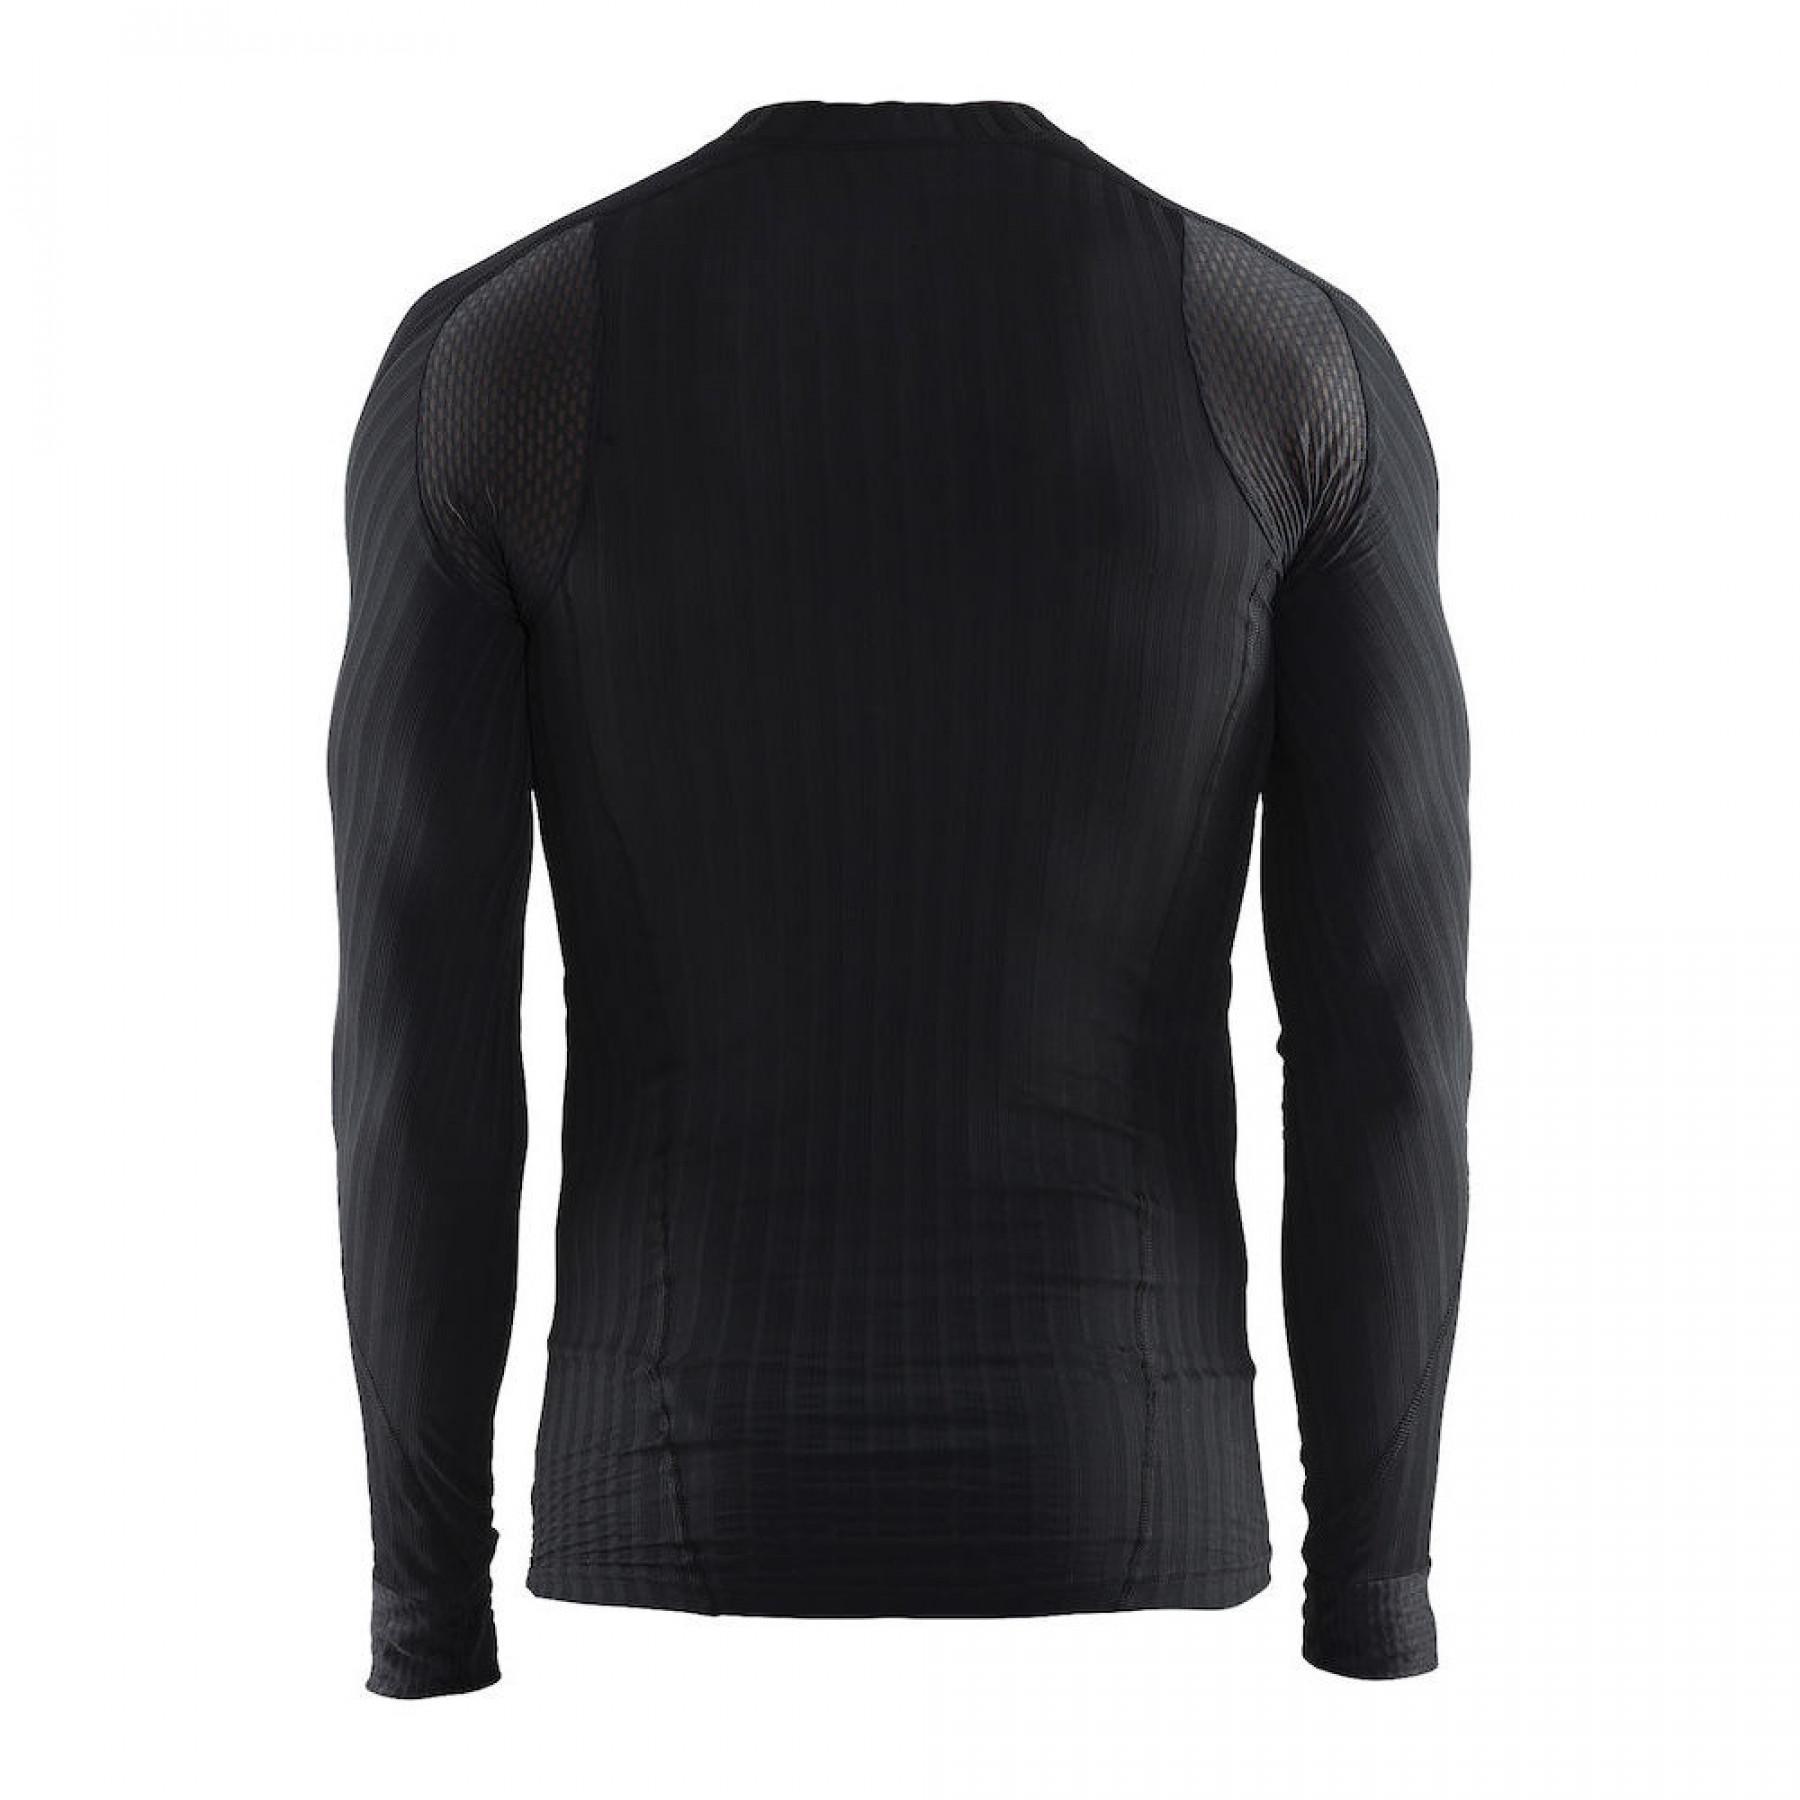 be active extreme 2.0 long-sleeved compression jersey